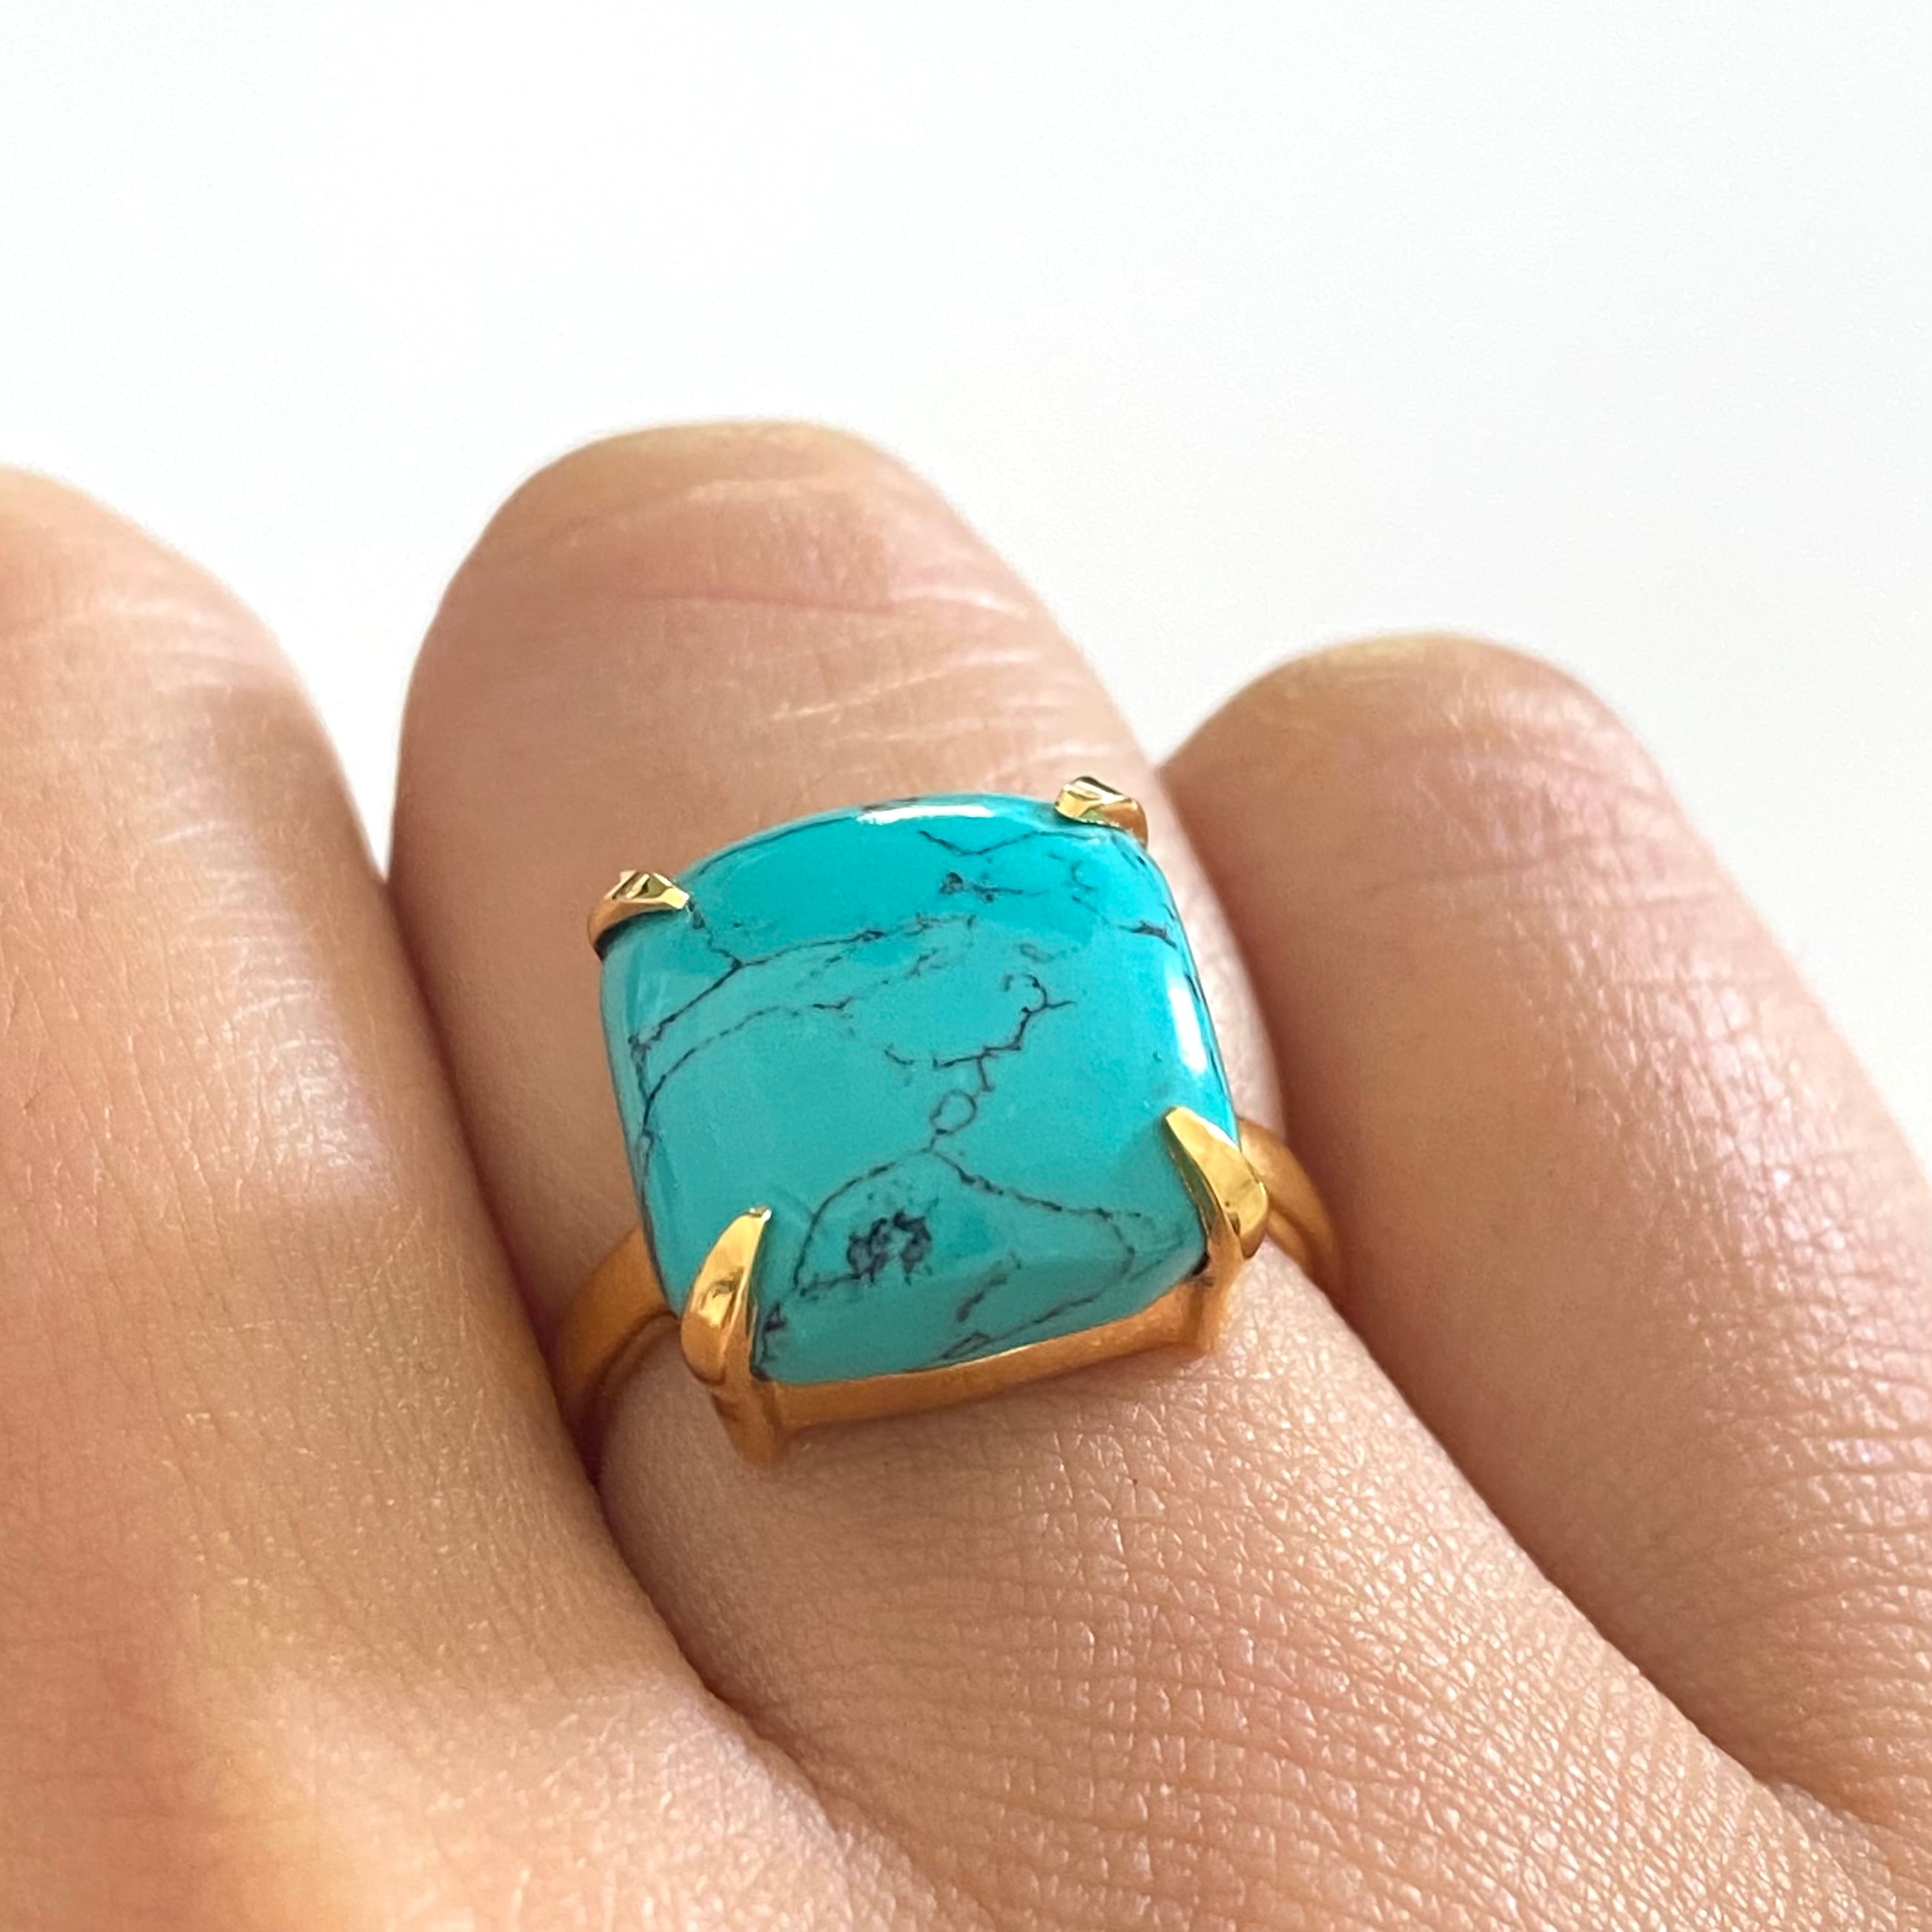 Square Cabochon Turquoise Ring in Gold Plated Sterling Silver